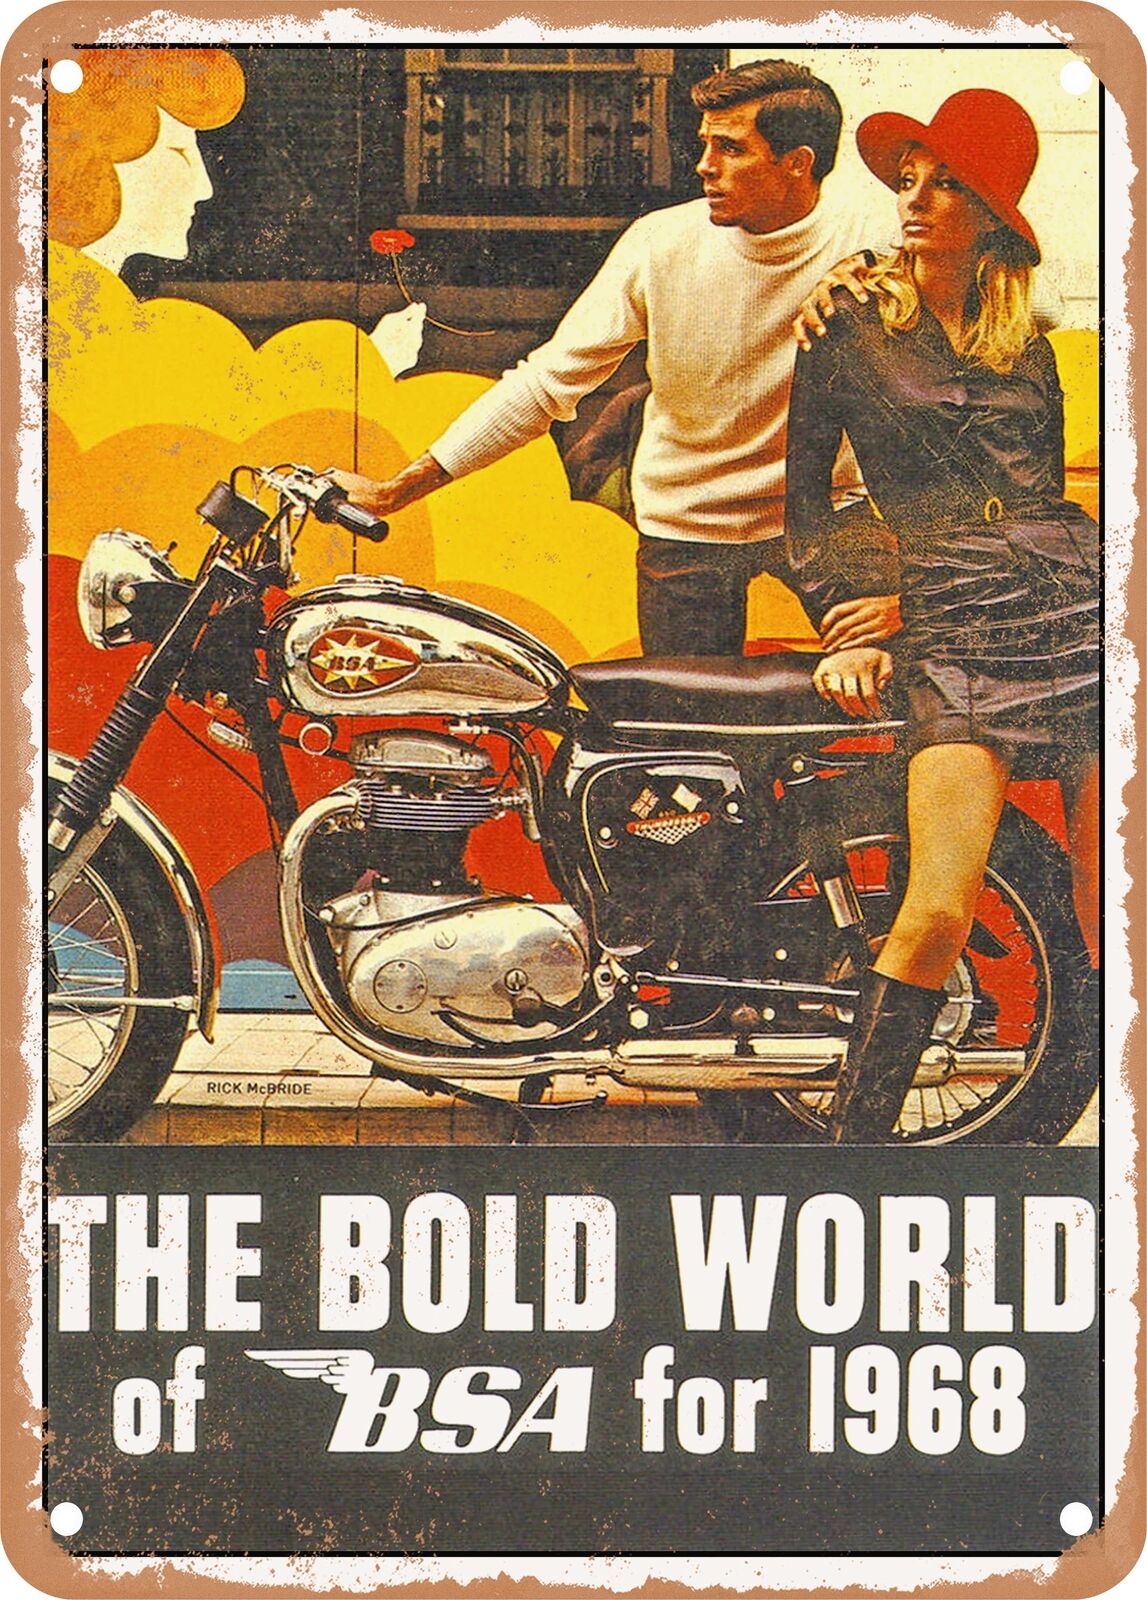 METAL SIGN - 1968 The Bold World of BSA for 1968 Vintage Ad